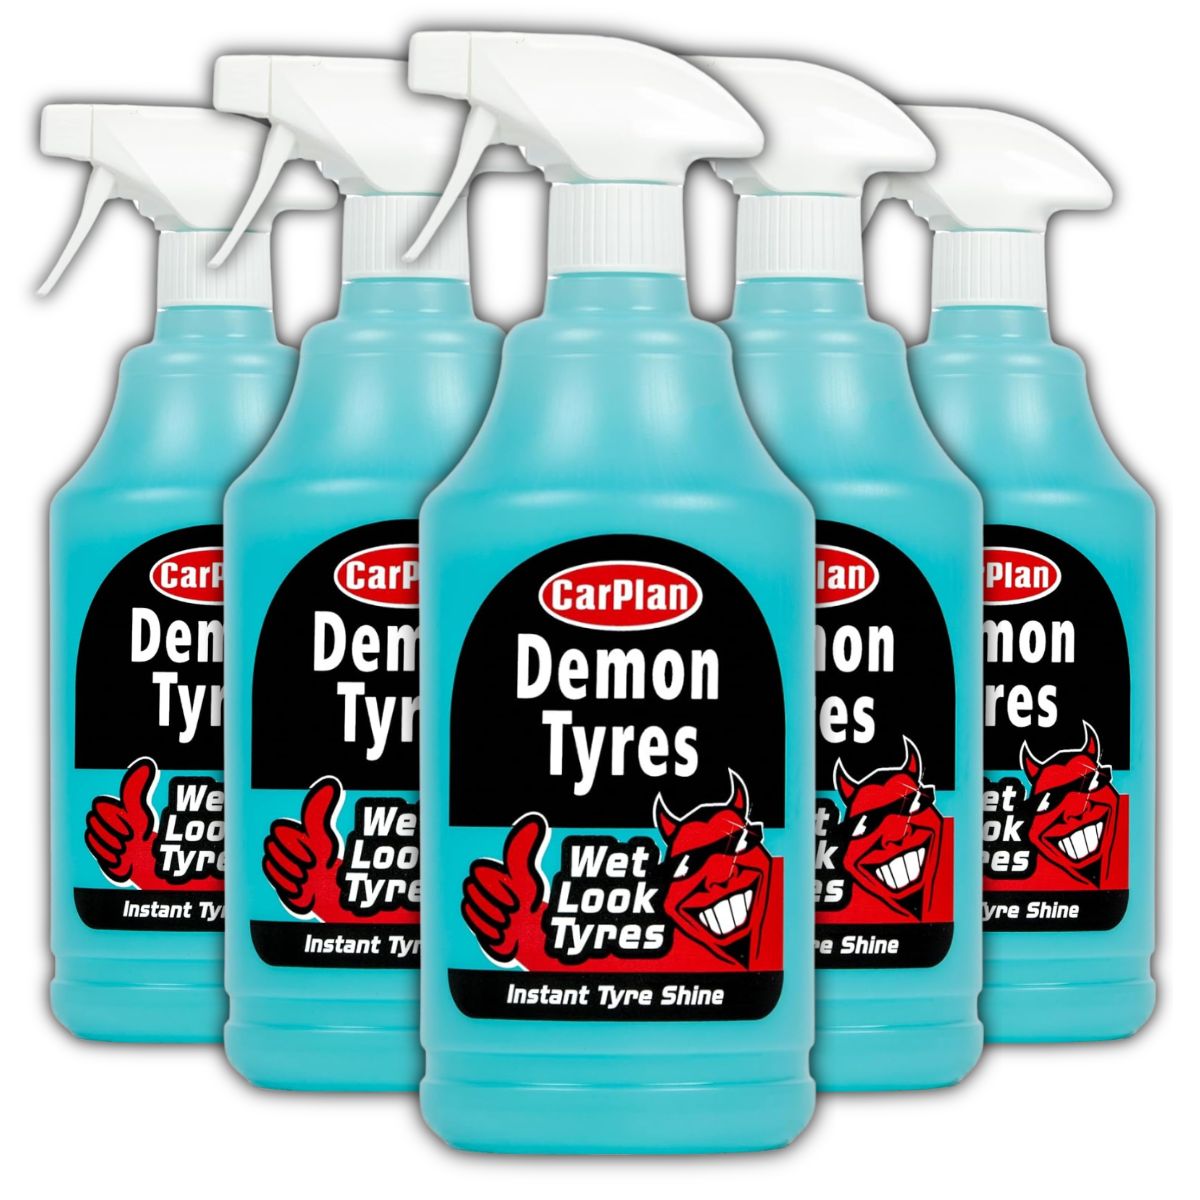 CarPlan Demon Tyres - Wet Look Tyres, 1 Litre - South East Clearance Centre